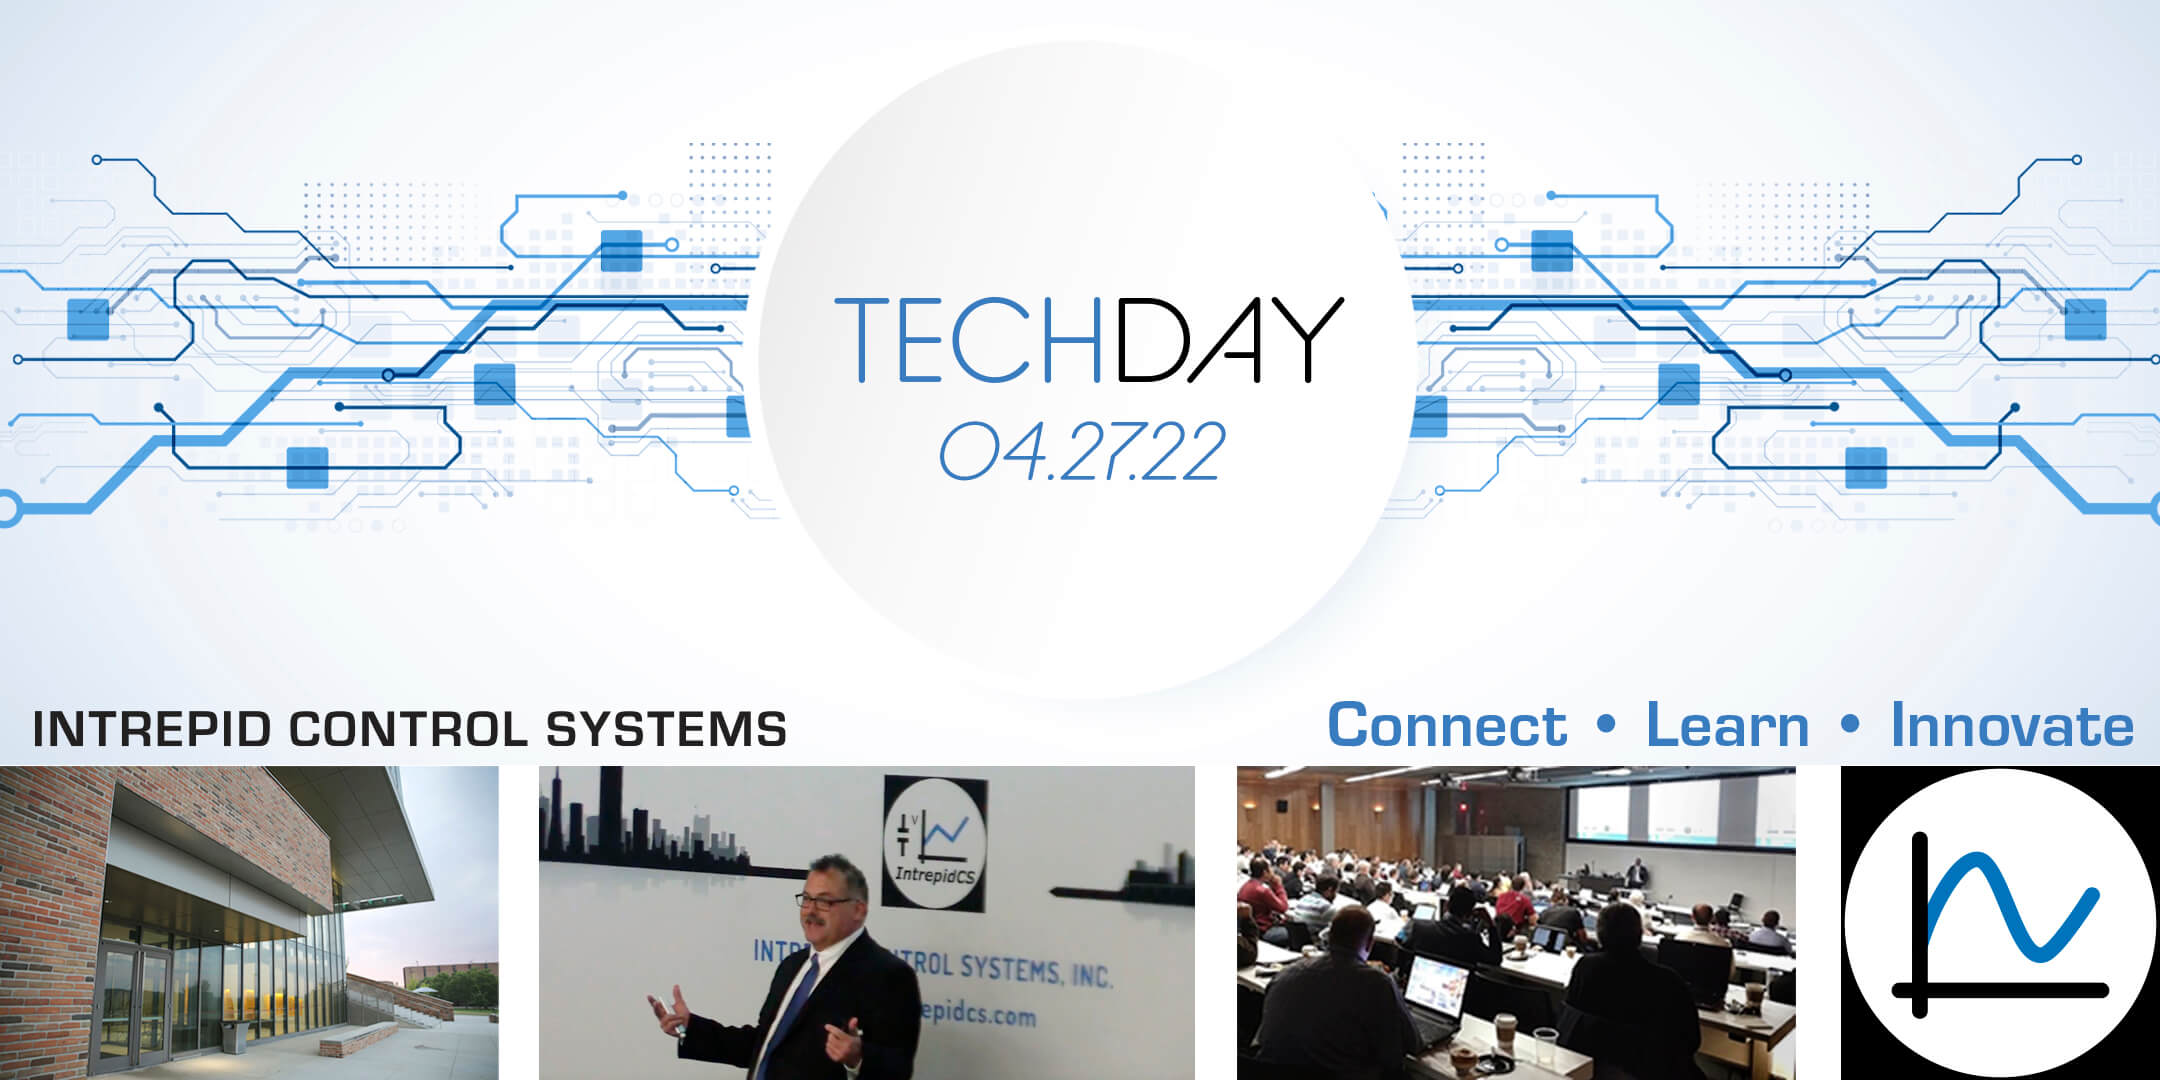 You’re Invited!  Intrepid Tech Day 2022 on April 27th, 2022